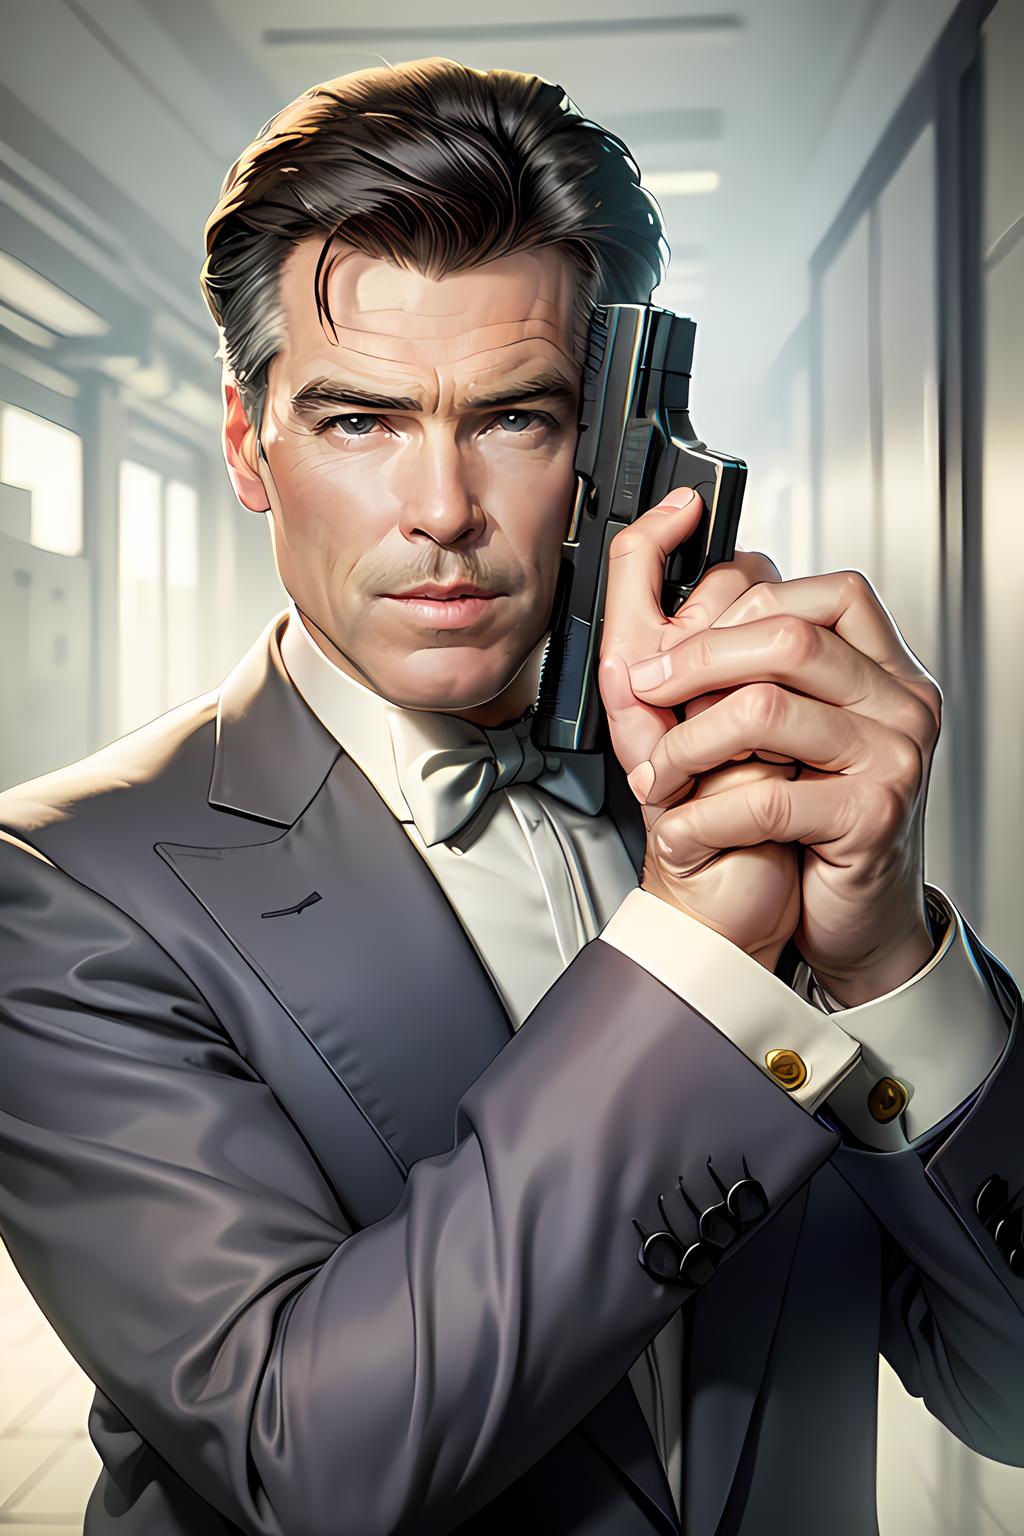 A man in a suit holding a gun.